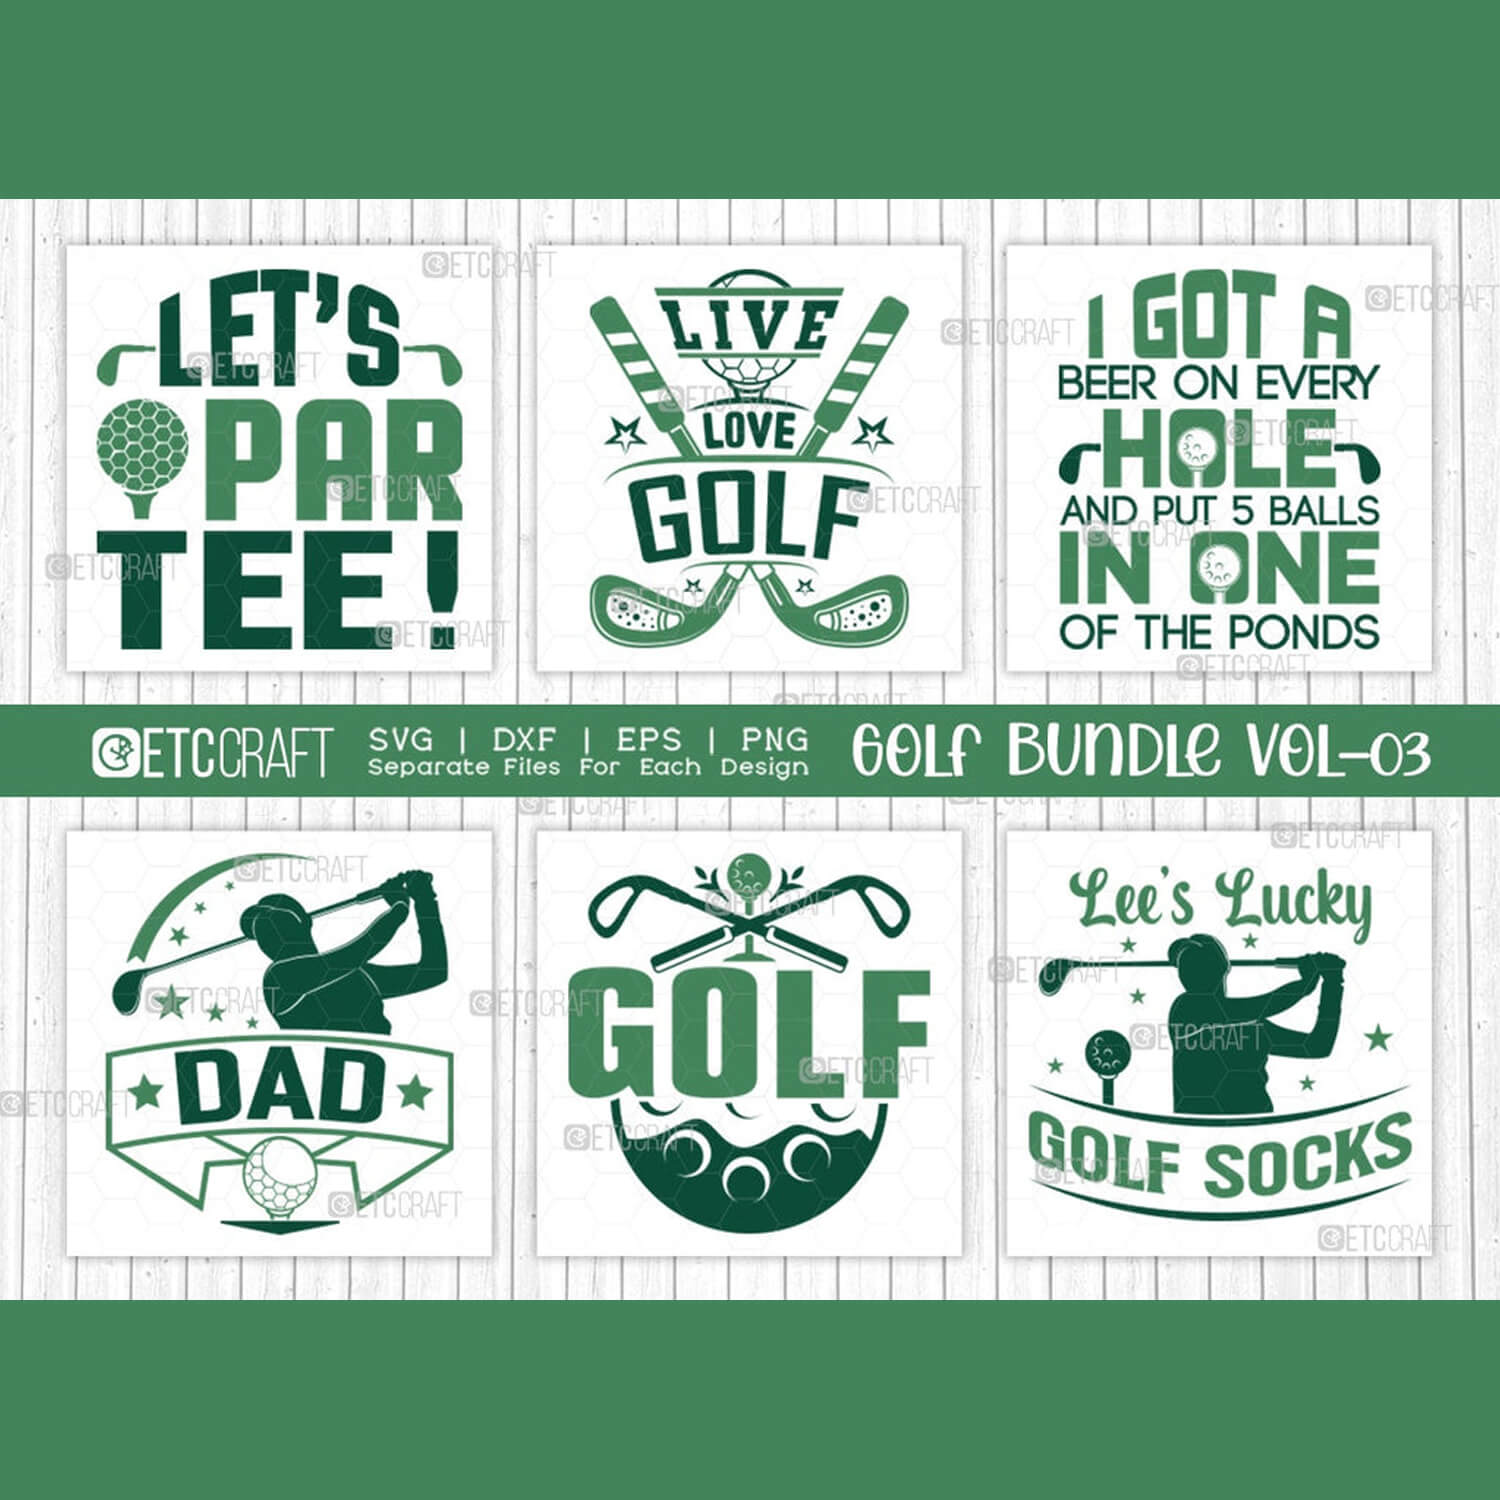 Six emblems on the theme of golf.